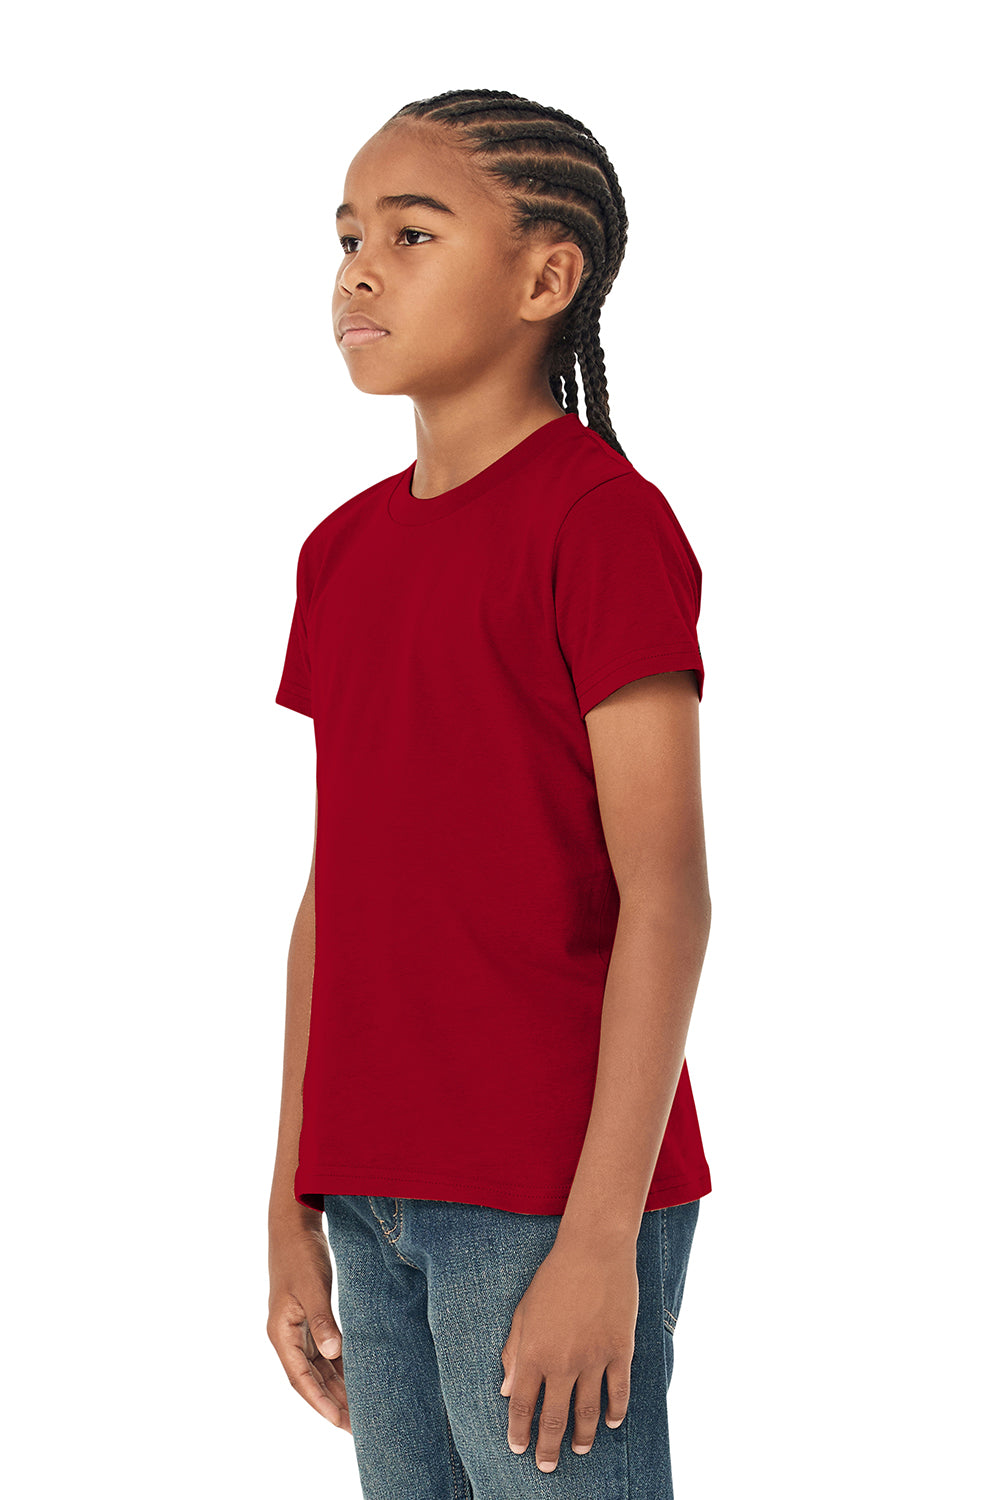 Bella + Canvas 3001Y Youth Jersey Short Sleeve Crewneck T-Shirt Red Model 3Q